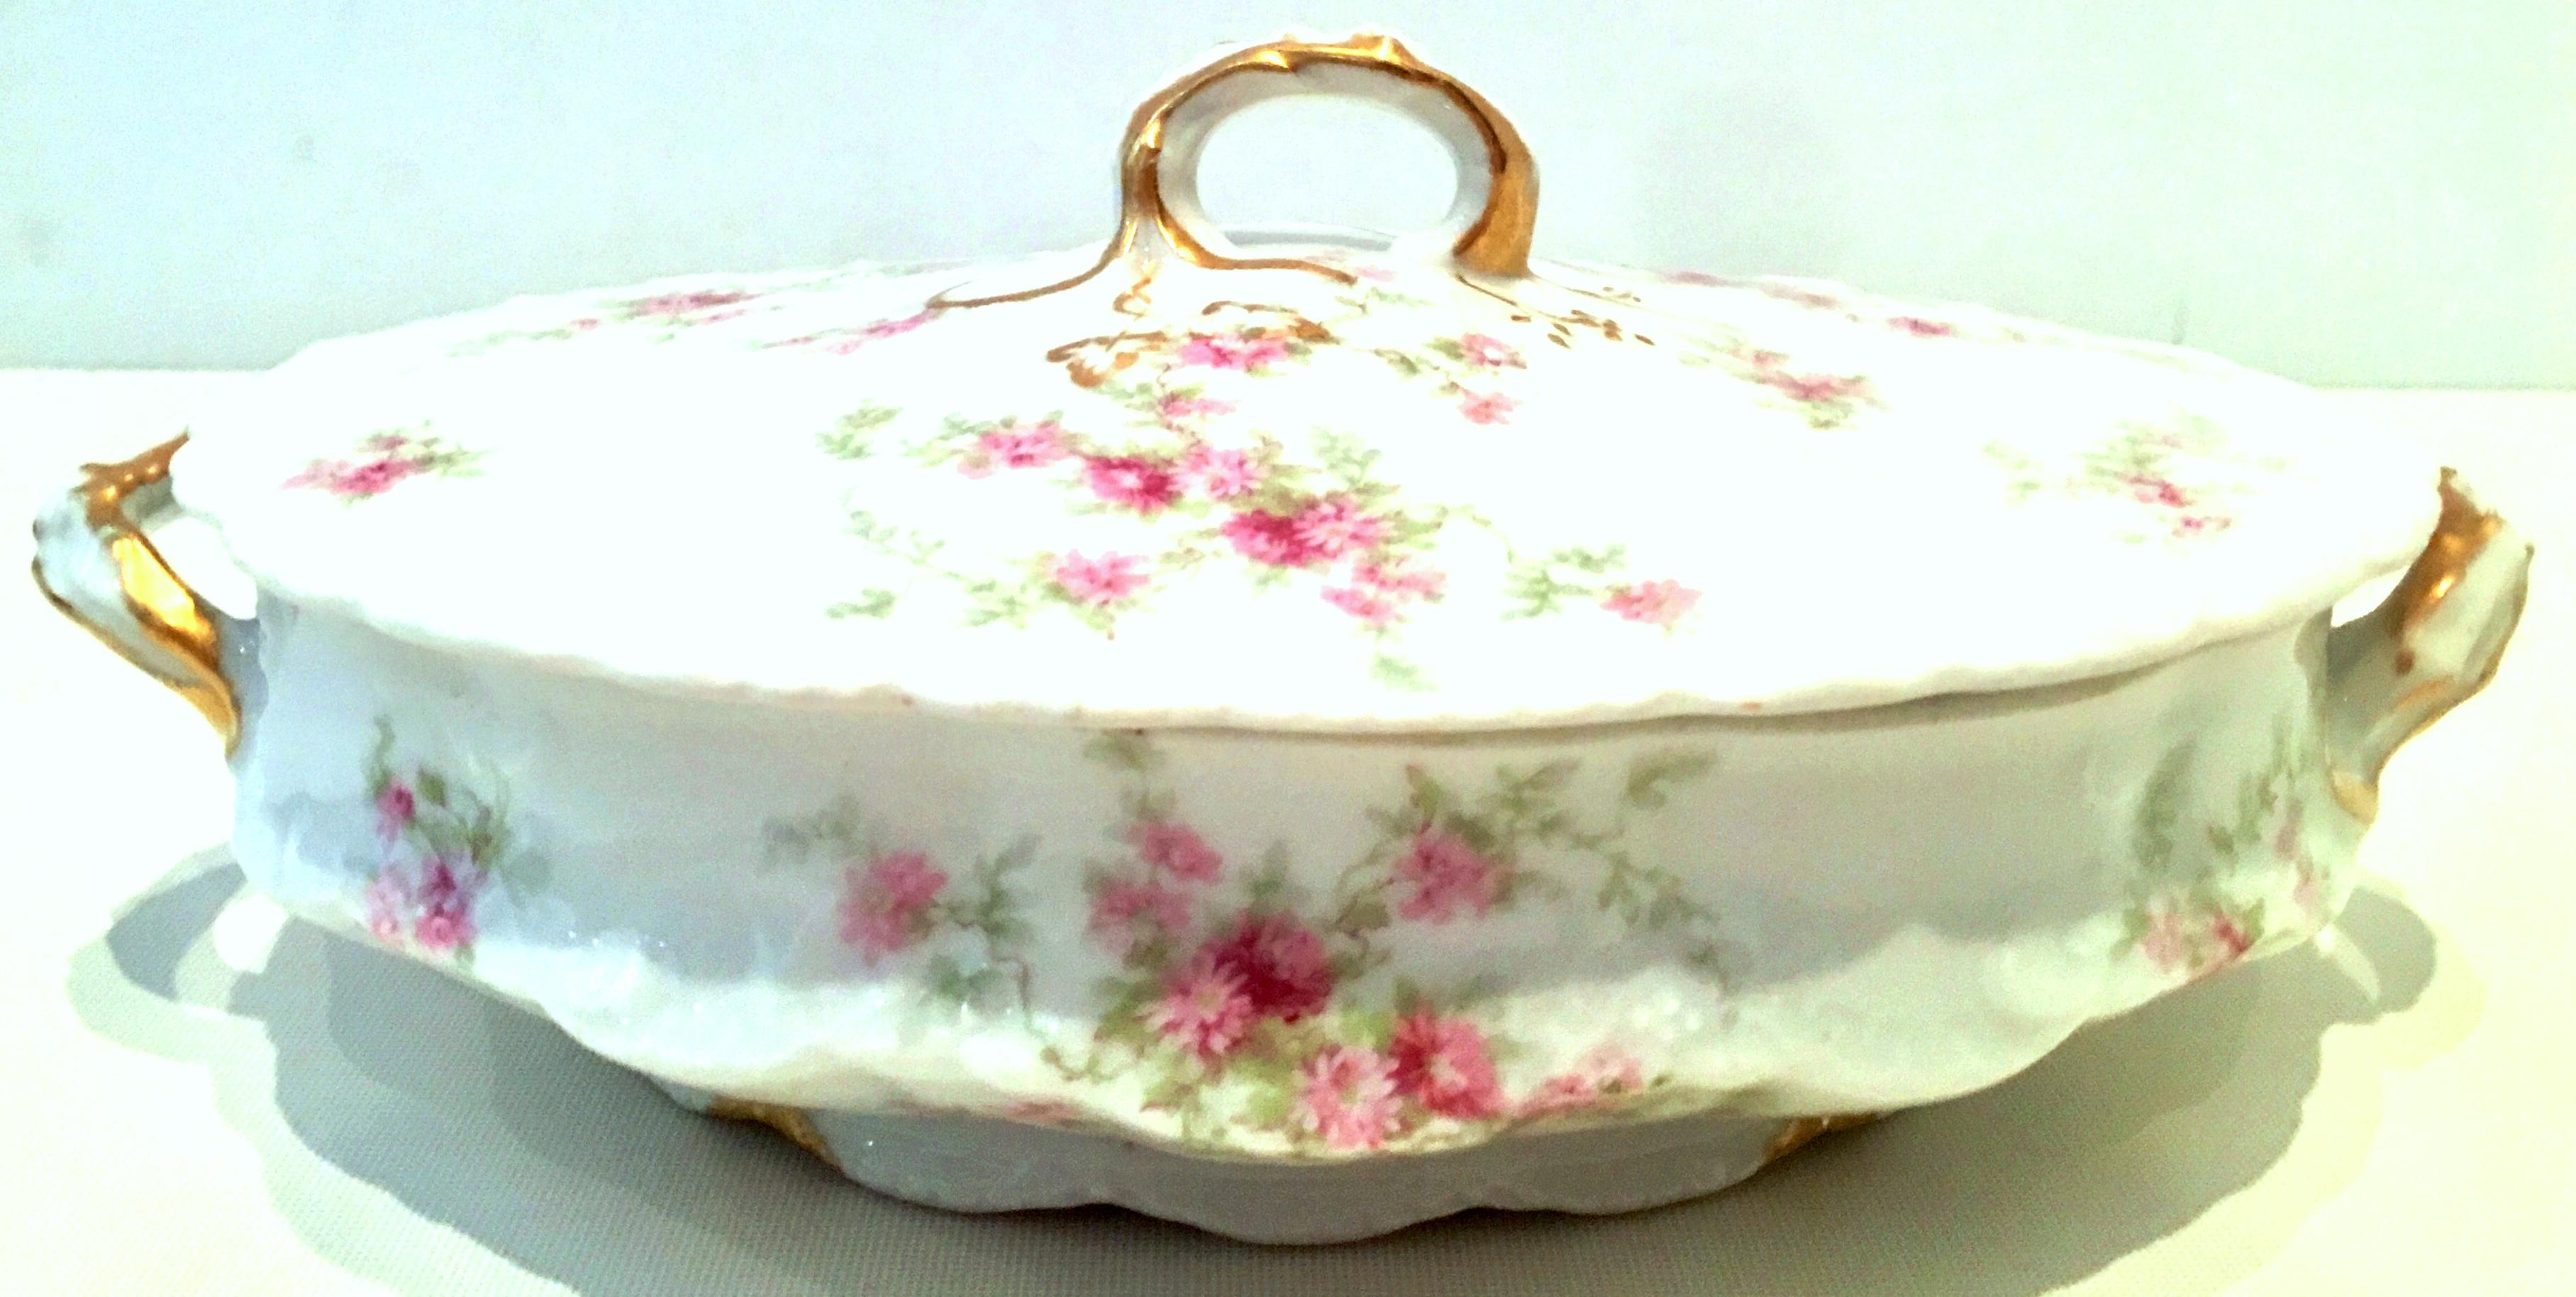 20th century French limoges porcelain and 22-karat gold set of three serving pieces by, Theodore Haviland. Set features a bright white ground with scalloped shape detail, hand painted in a bright pink and green flowing rose rose with hand painted